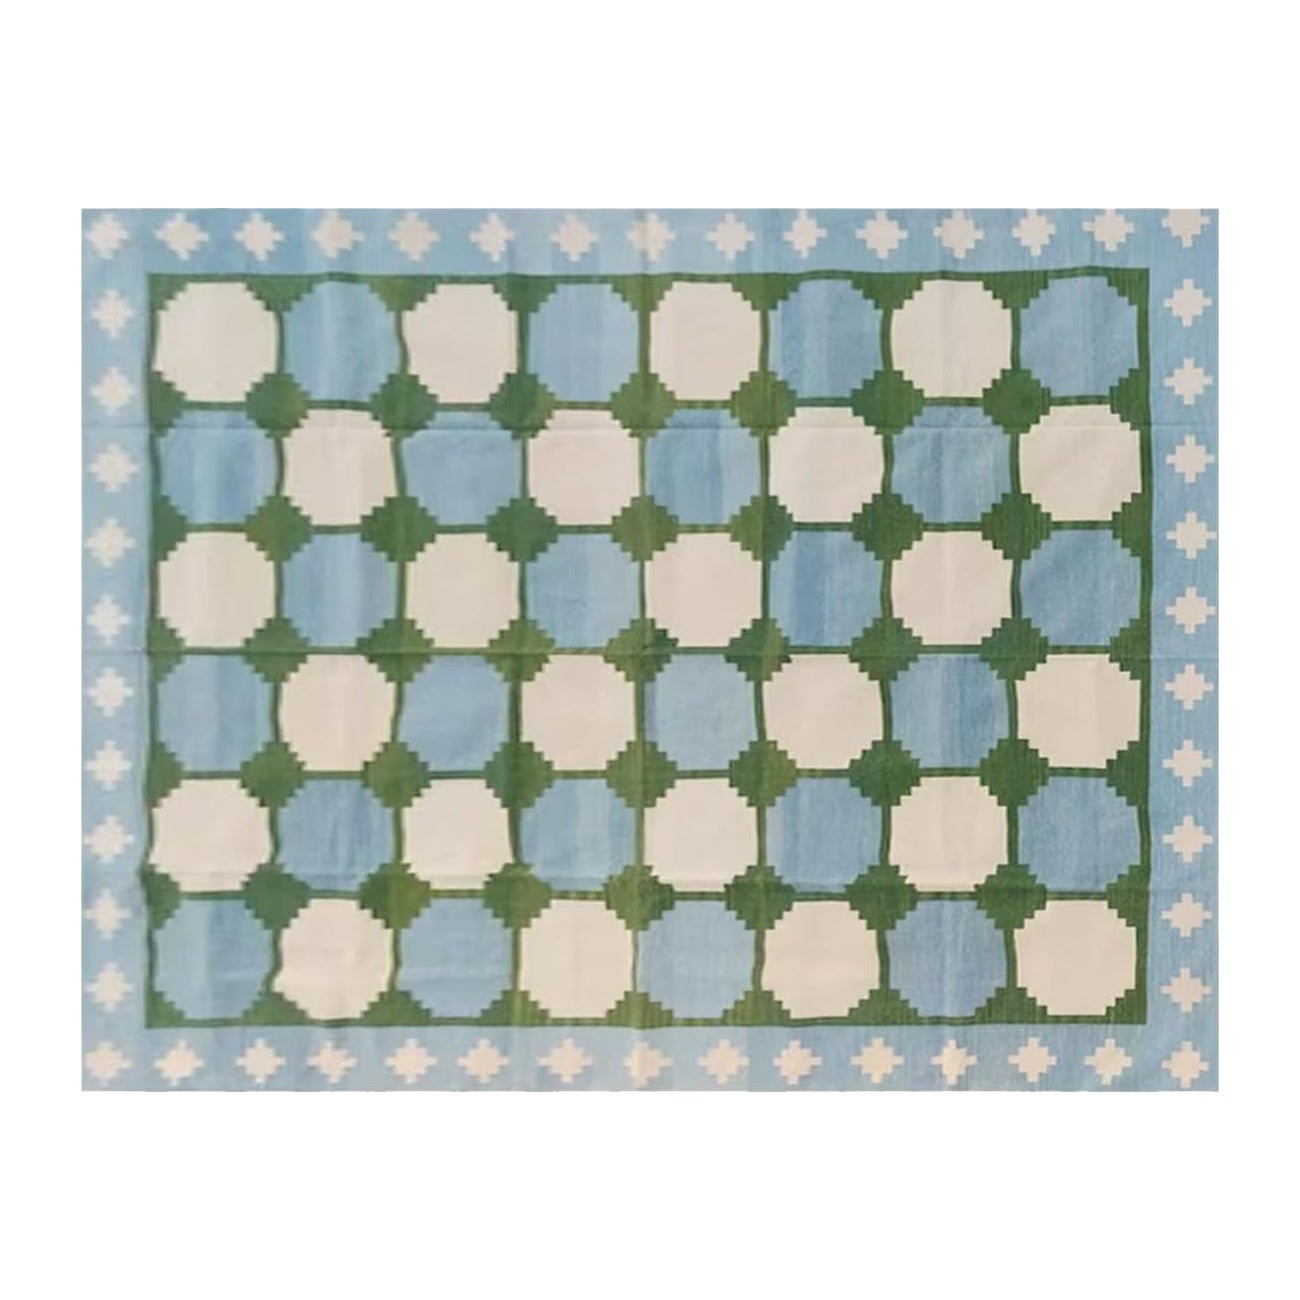 Handmade Cotton Flat Weave Rug, 9x12 Green And Blue Tile Pattern Indian Dhurrie For Sale